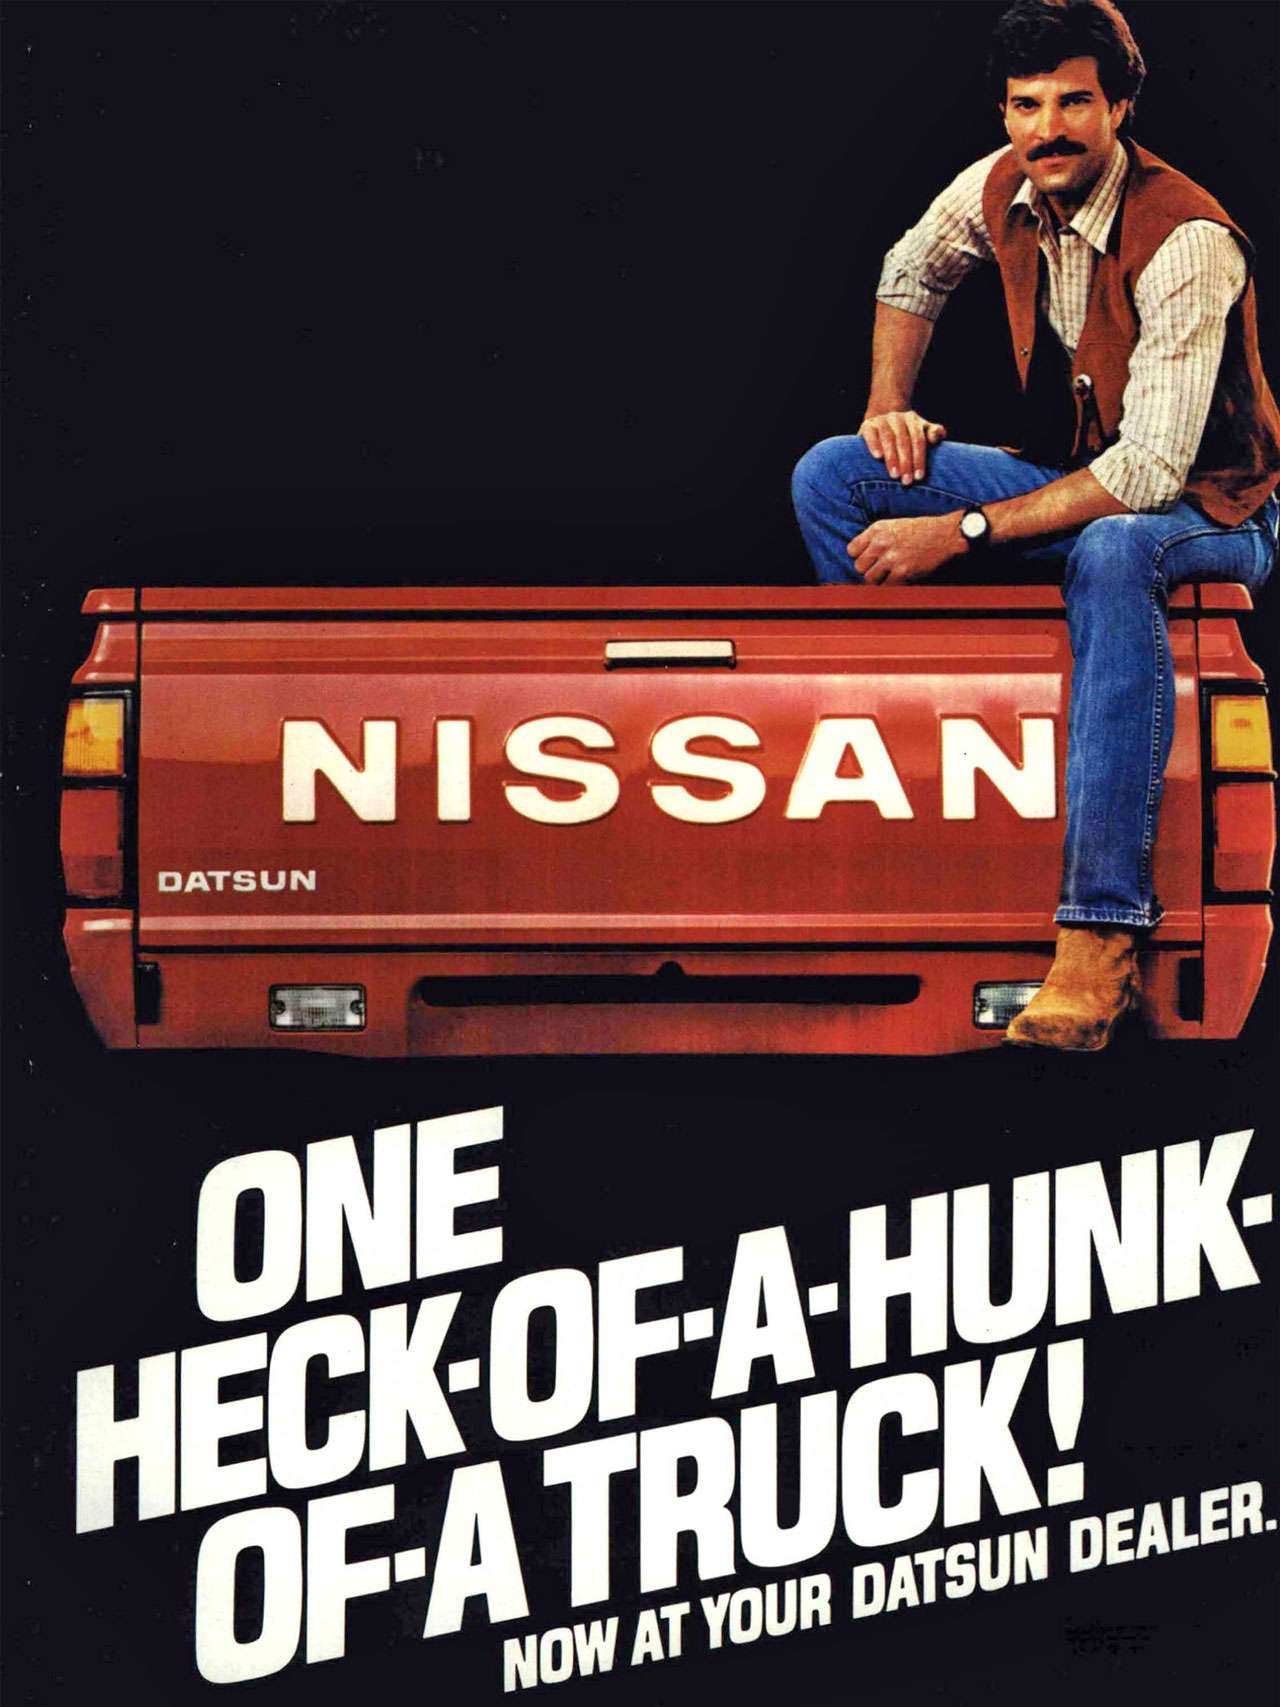 Nissan. One heck-of-a-hunk-of-a truck! Now at your Datsun dealer.